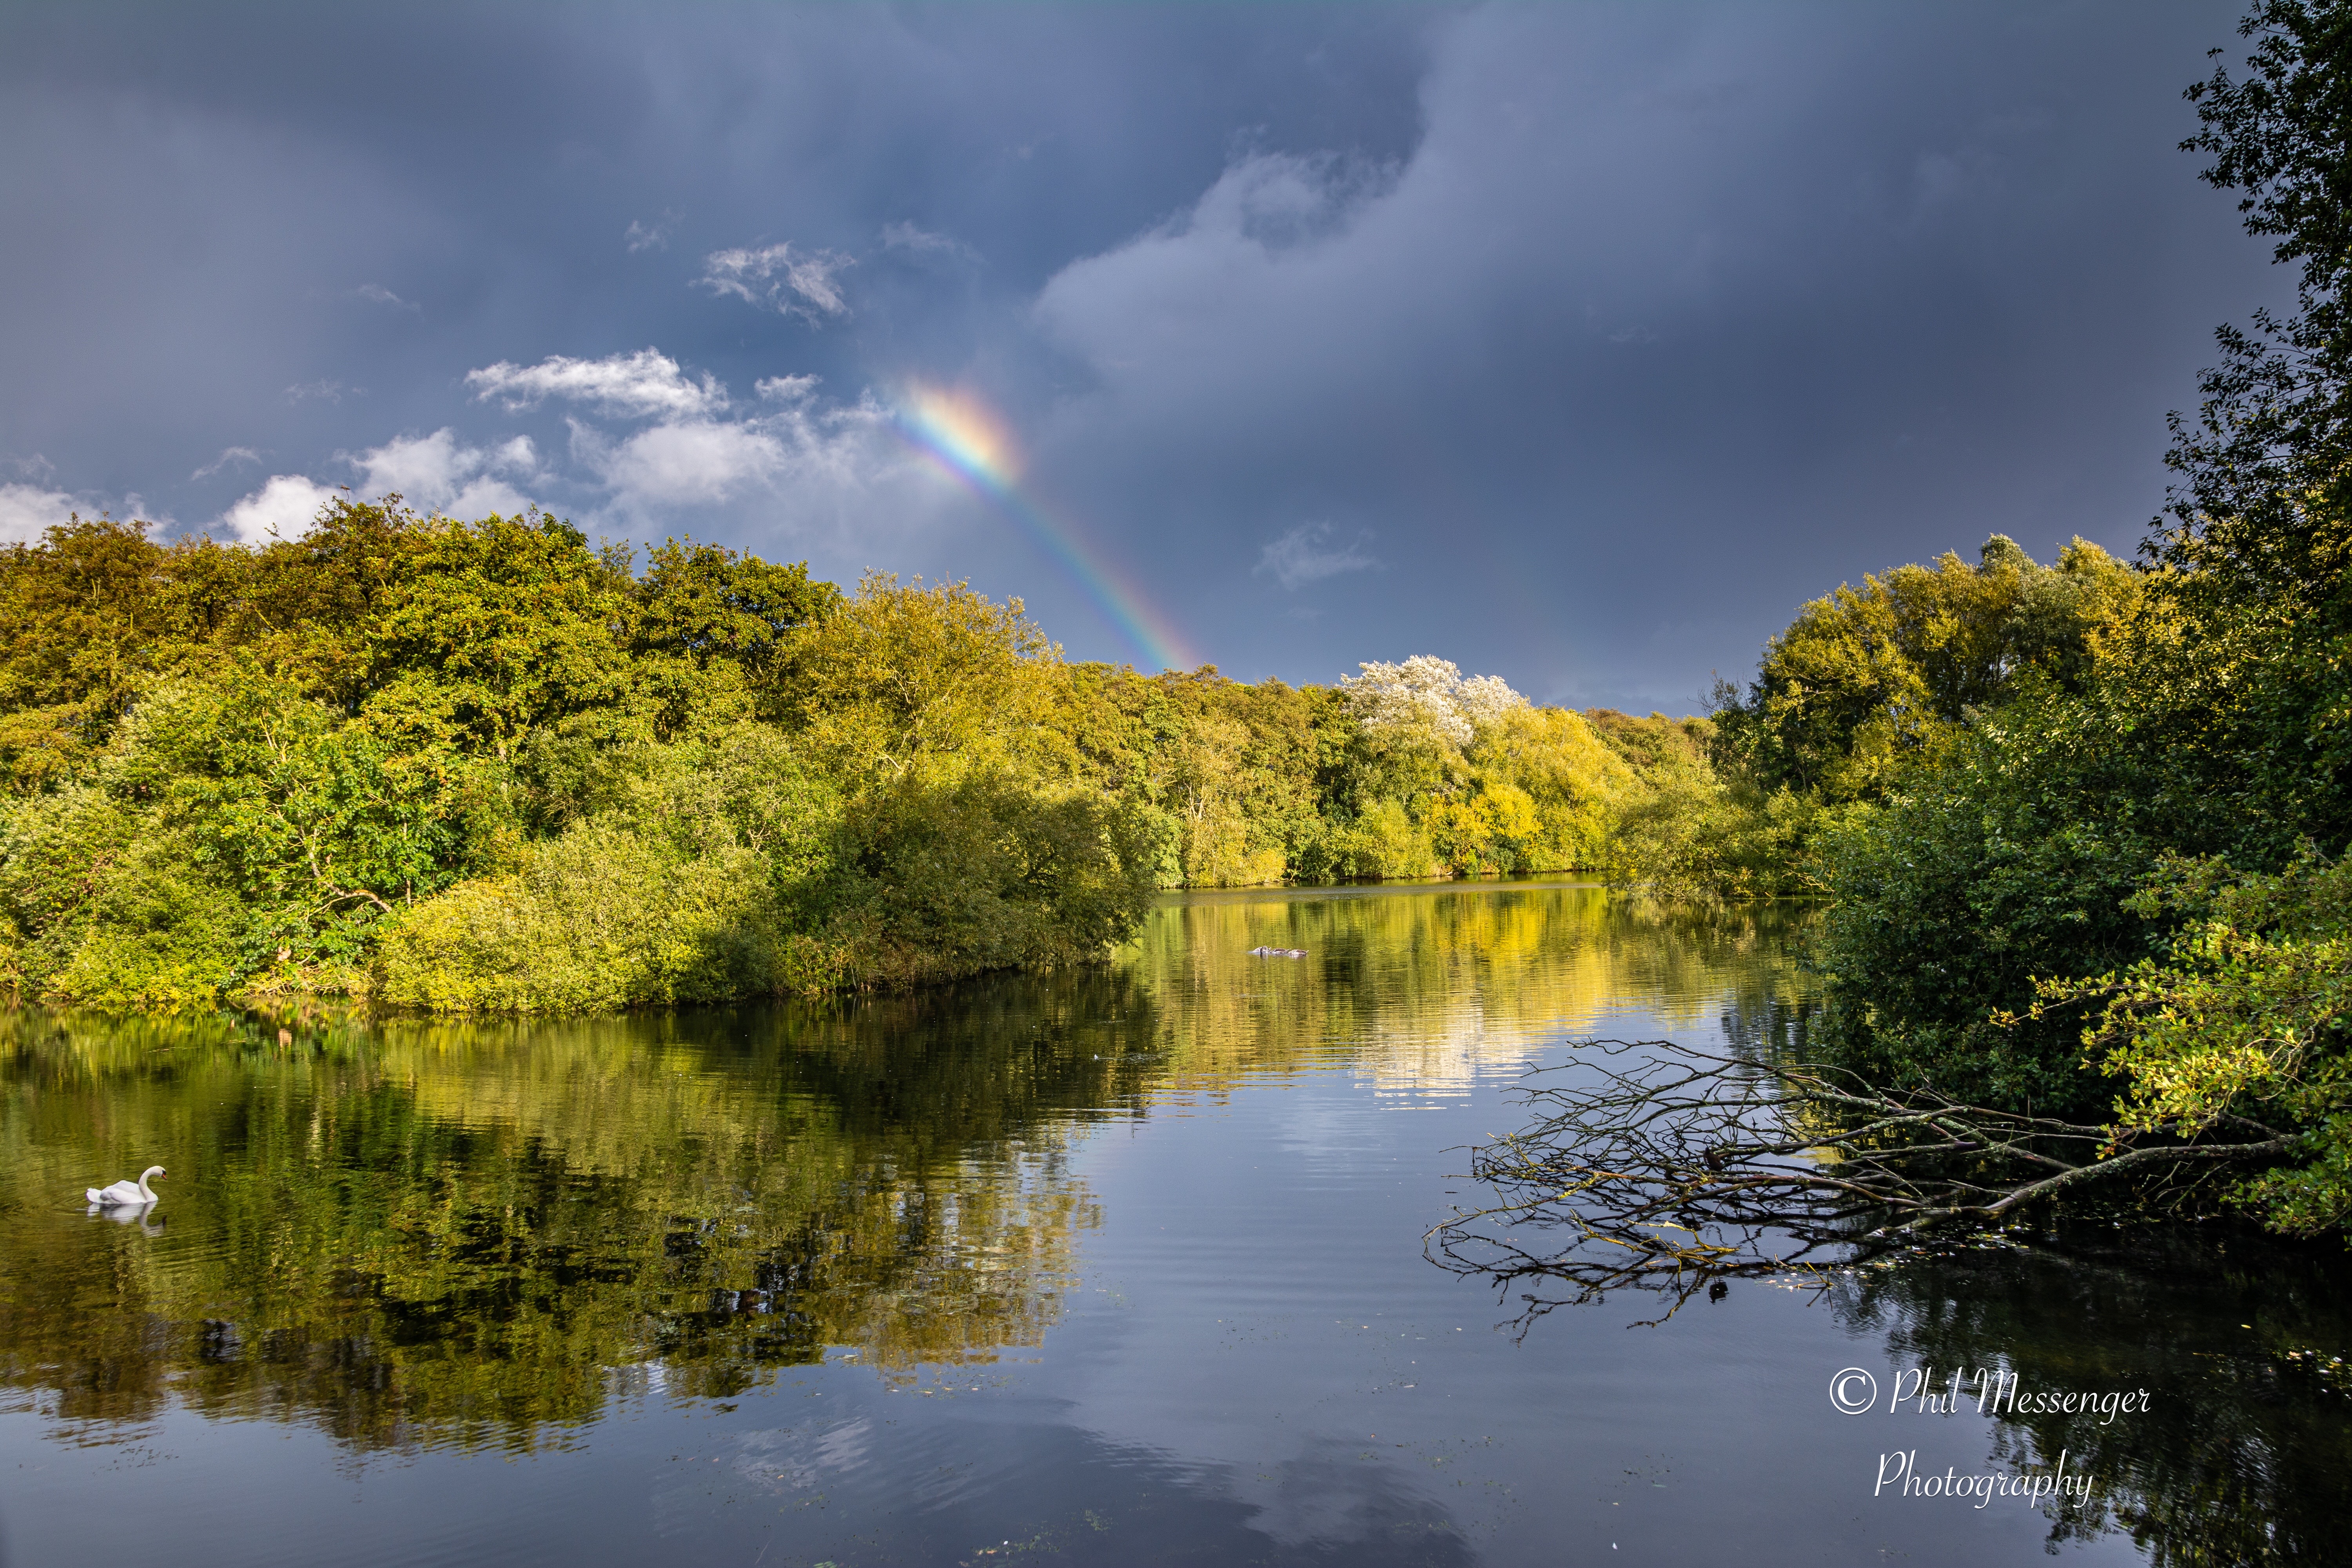 Another very small rainbow against dark clouds at Coate Water Swindon from yesterday afternoon after the rain.